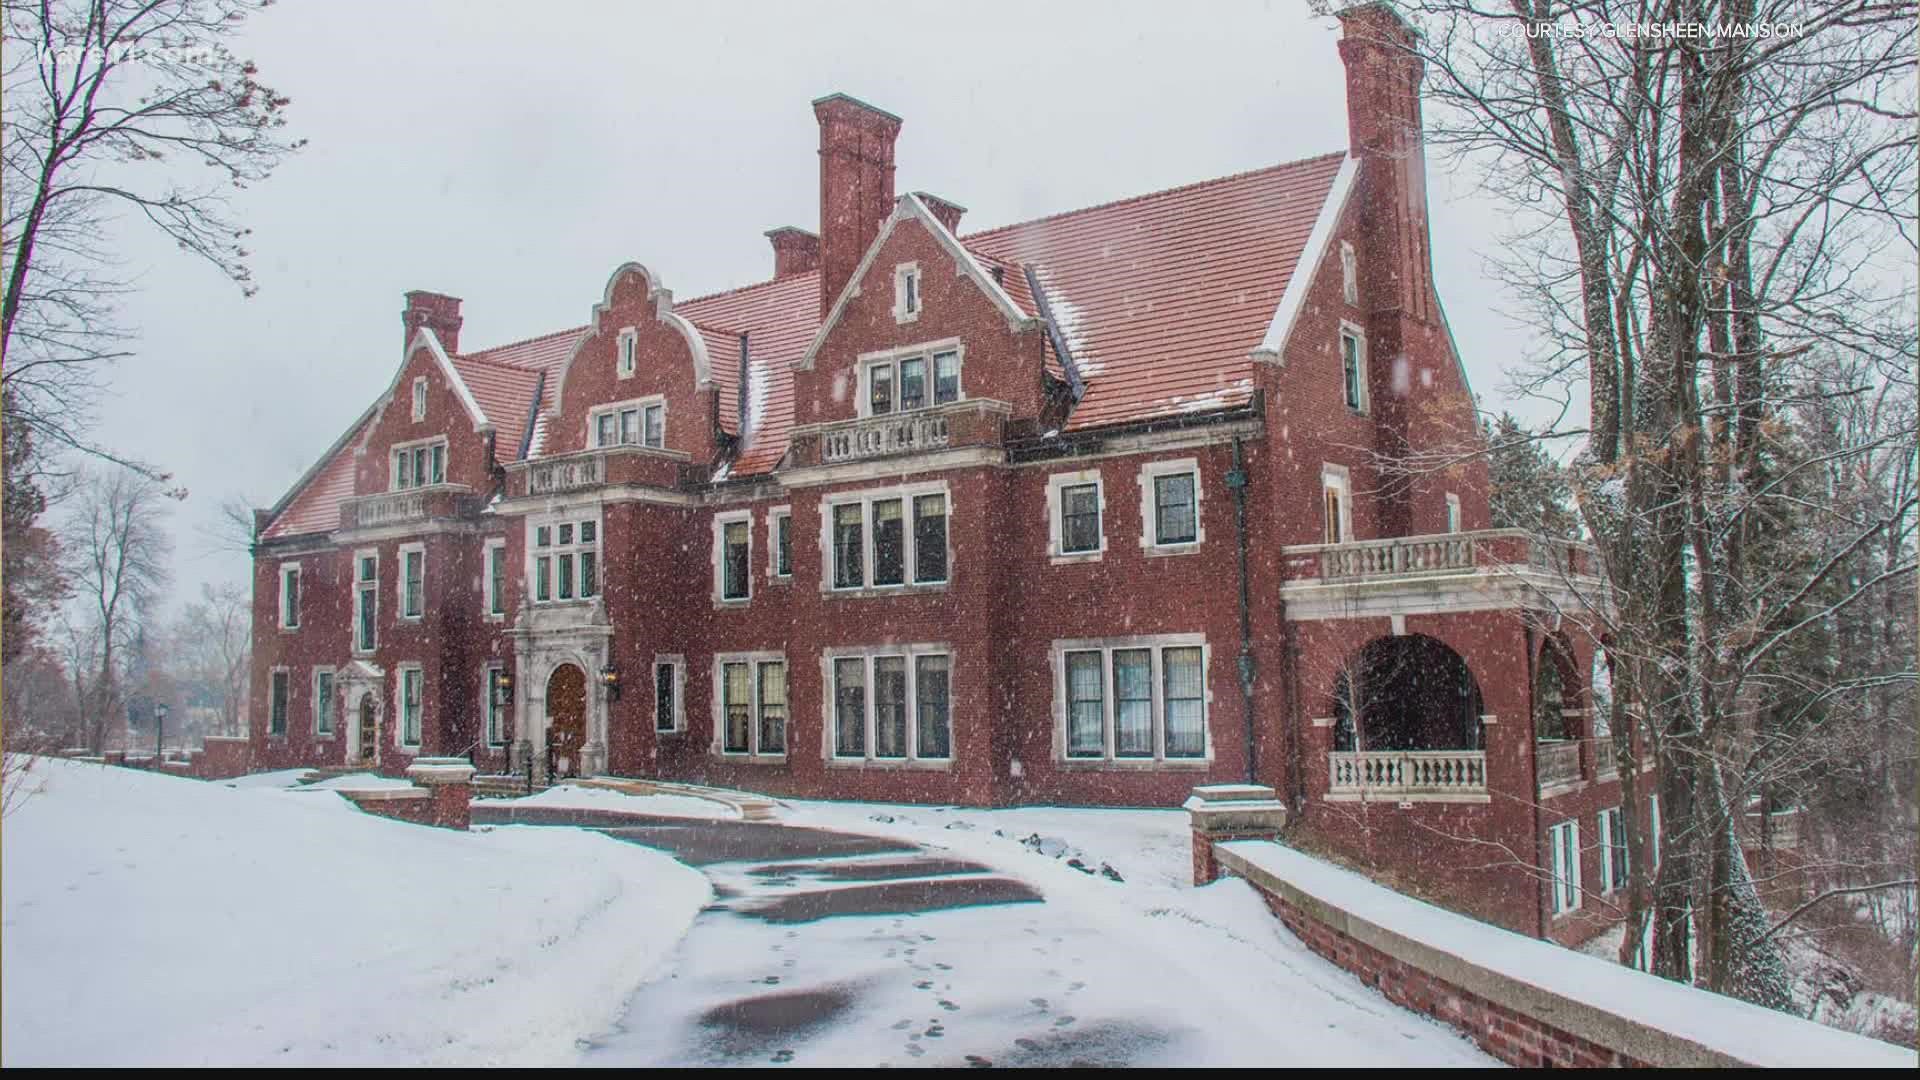 The legendary Glensheen Mansion in Duluth is all decked out for the holidays